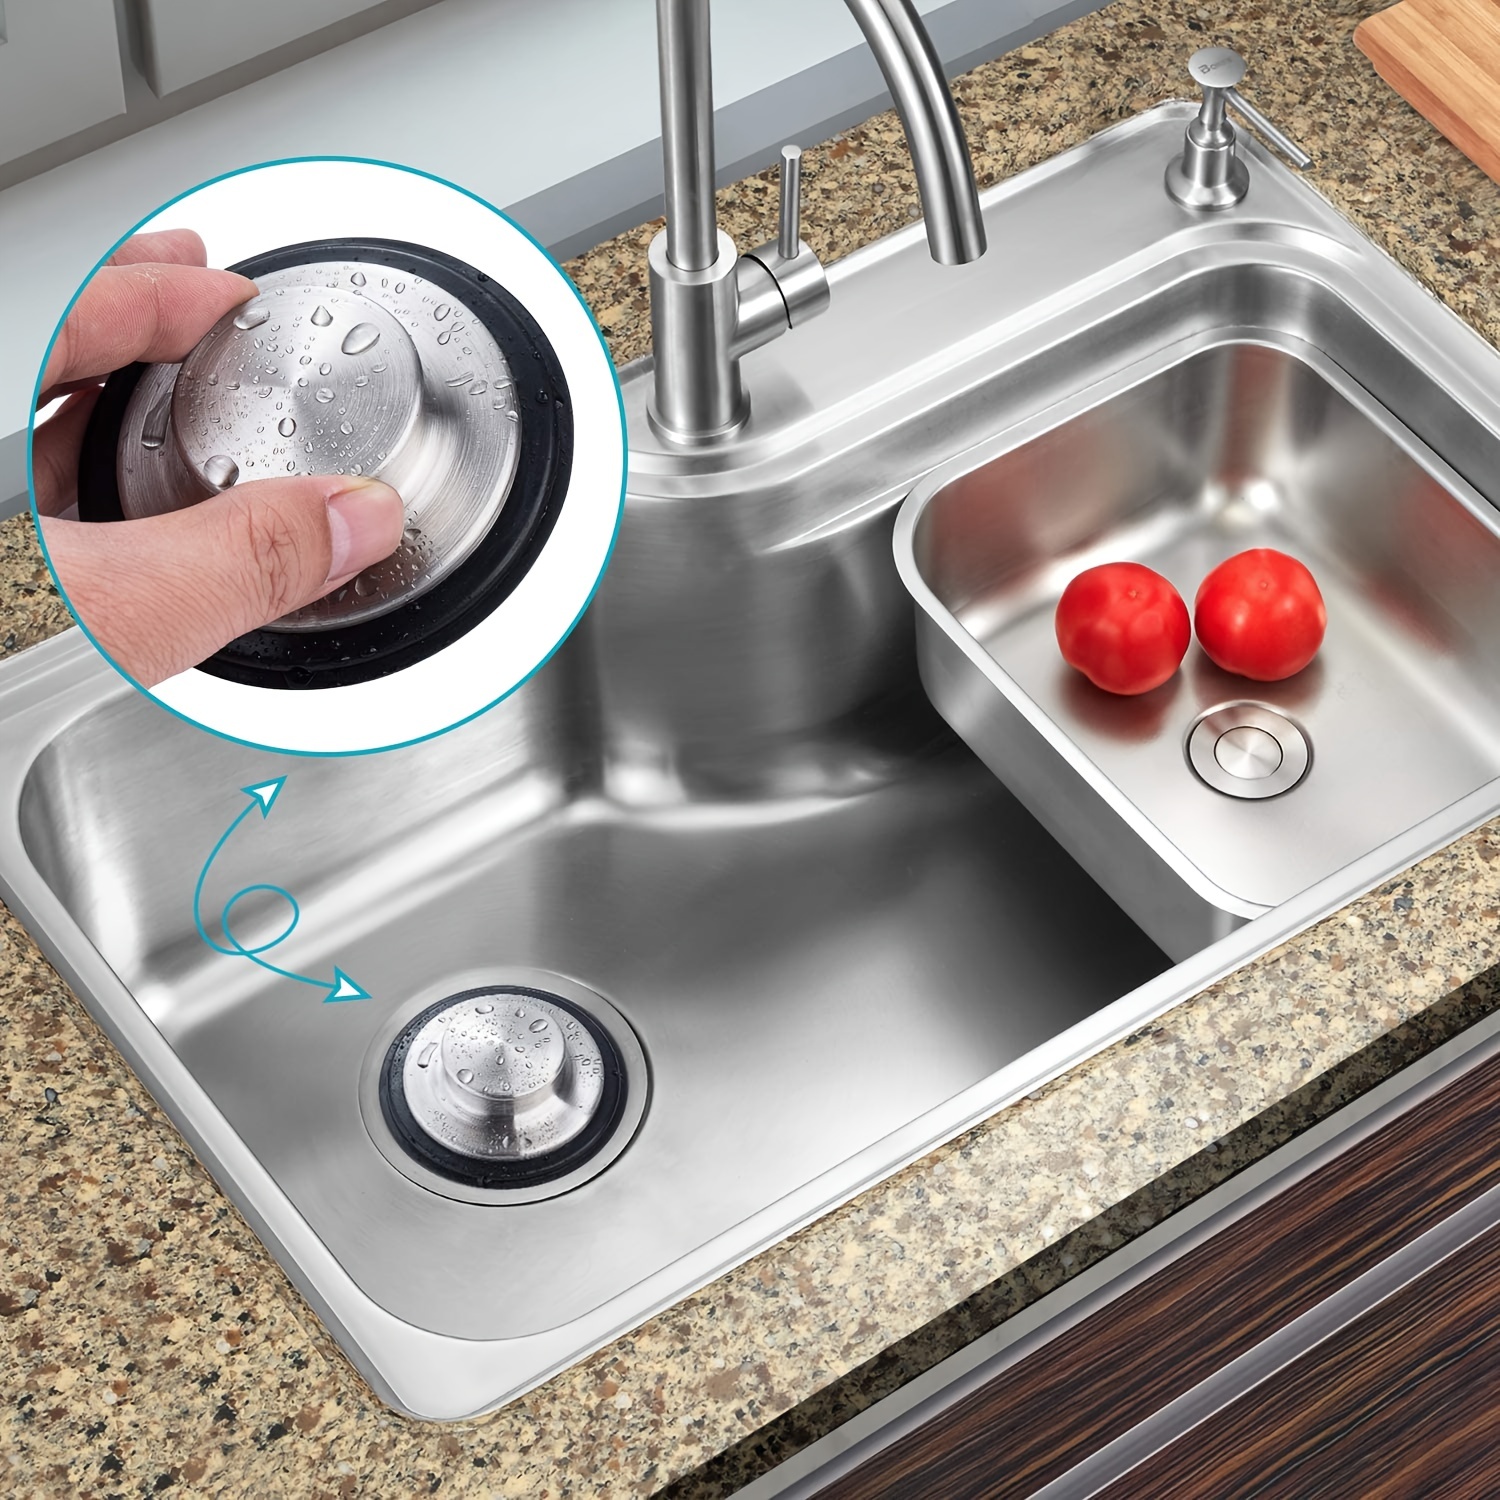 1pc Kitchen Sink Drain Plug With Garbage Disposal Stopper, Made Of